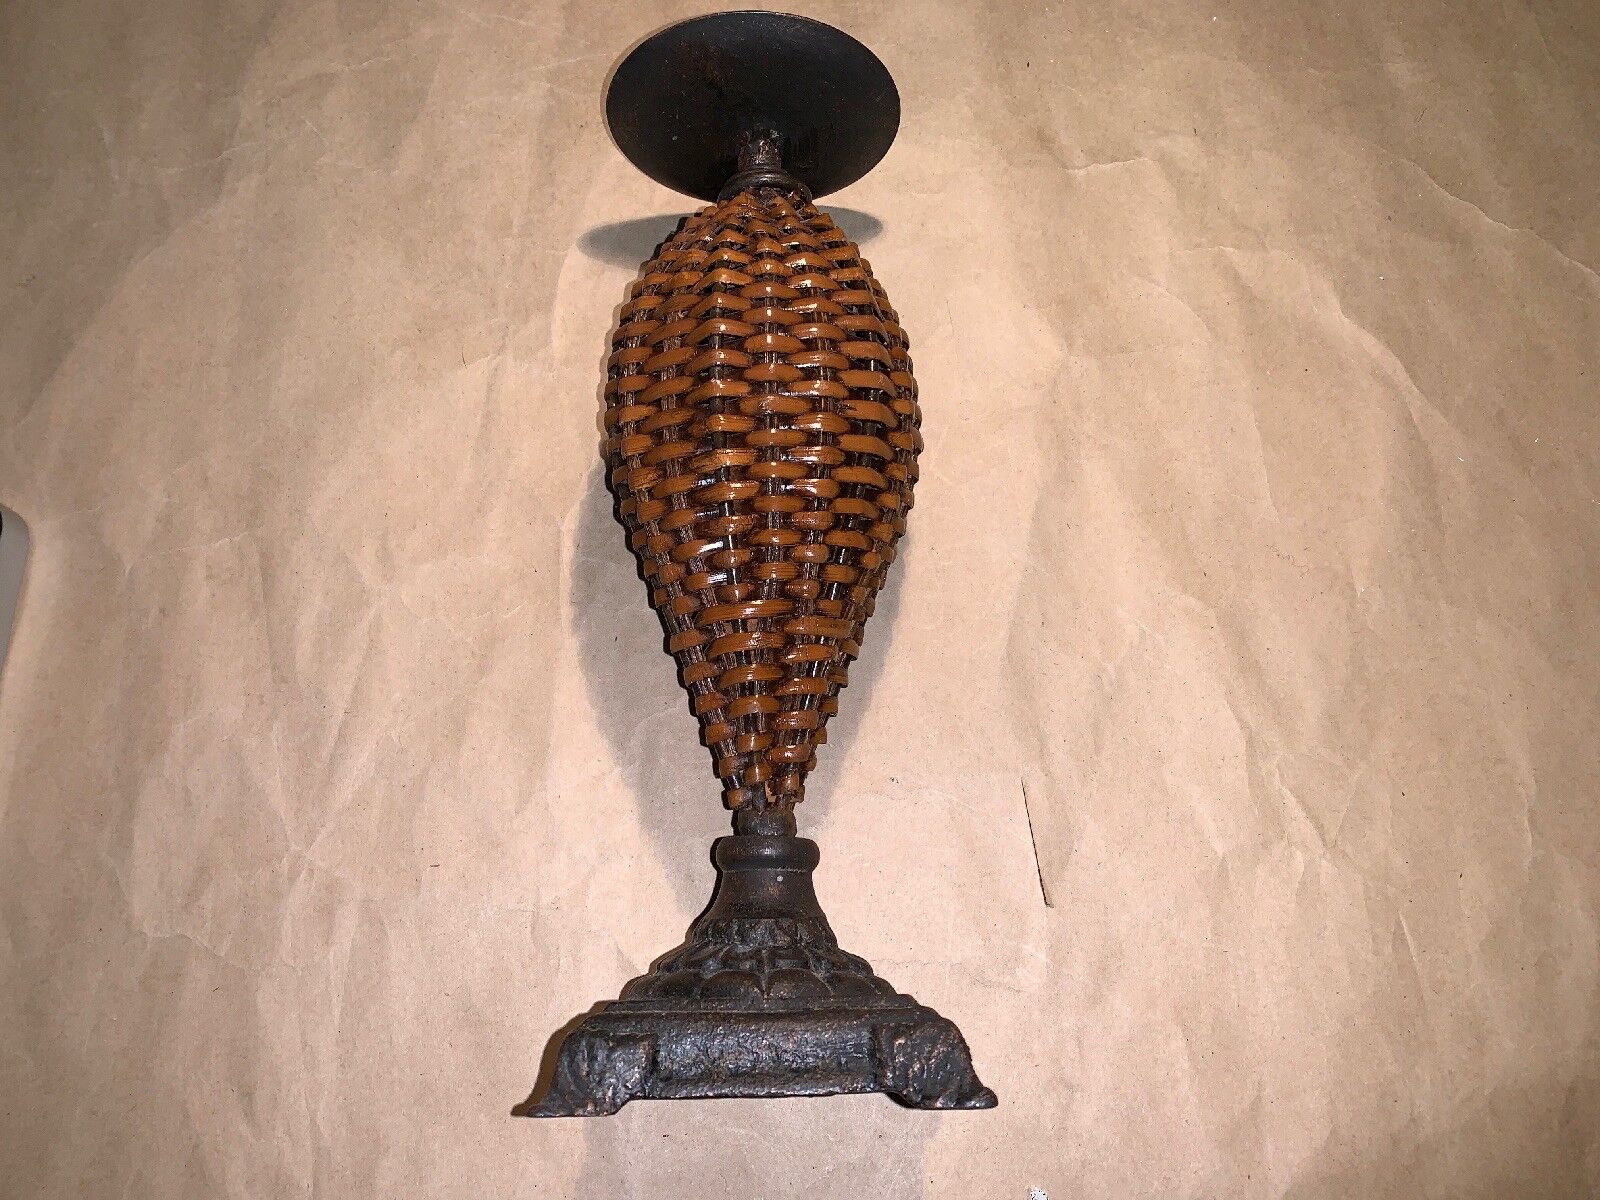 Metal Base With Wicker Woven Design Candle Holder 12”